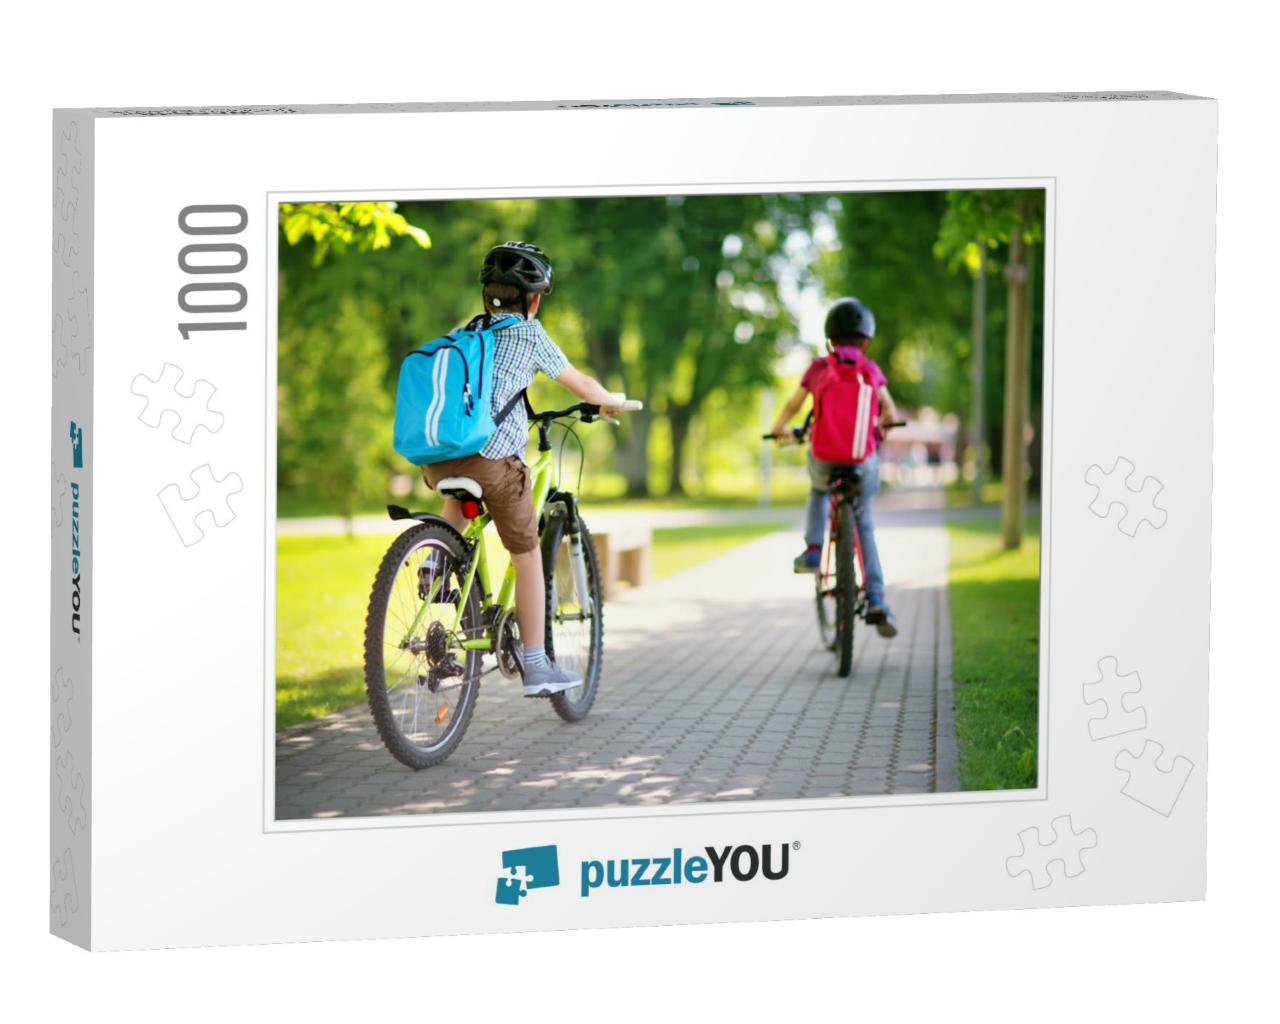 Children with Rucksacks Riding on Bikes in the Park Near... Jigsaw Puzzle with 1000 pieces